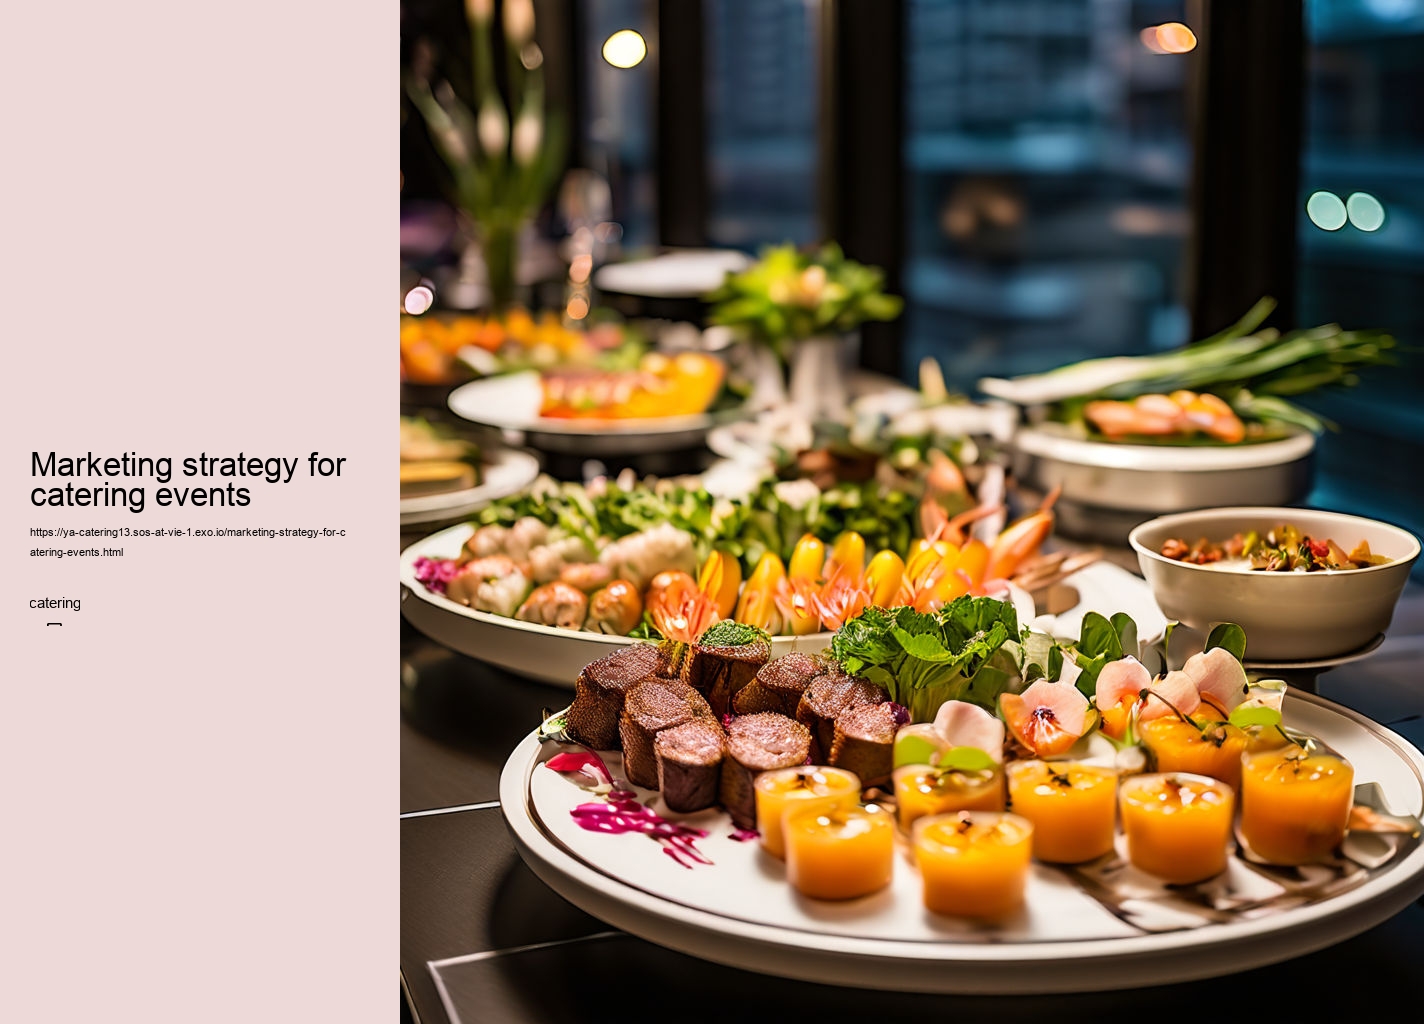 Marketing strategy for catering events